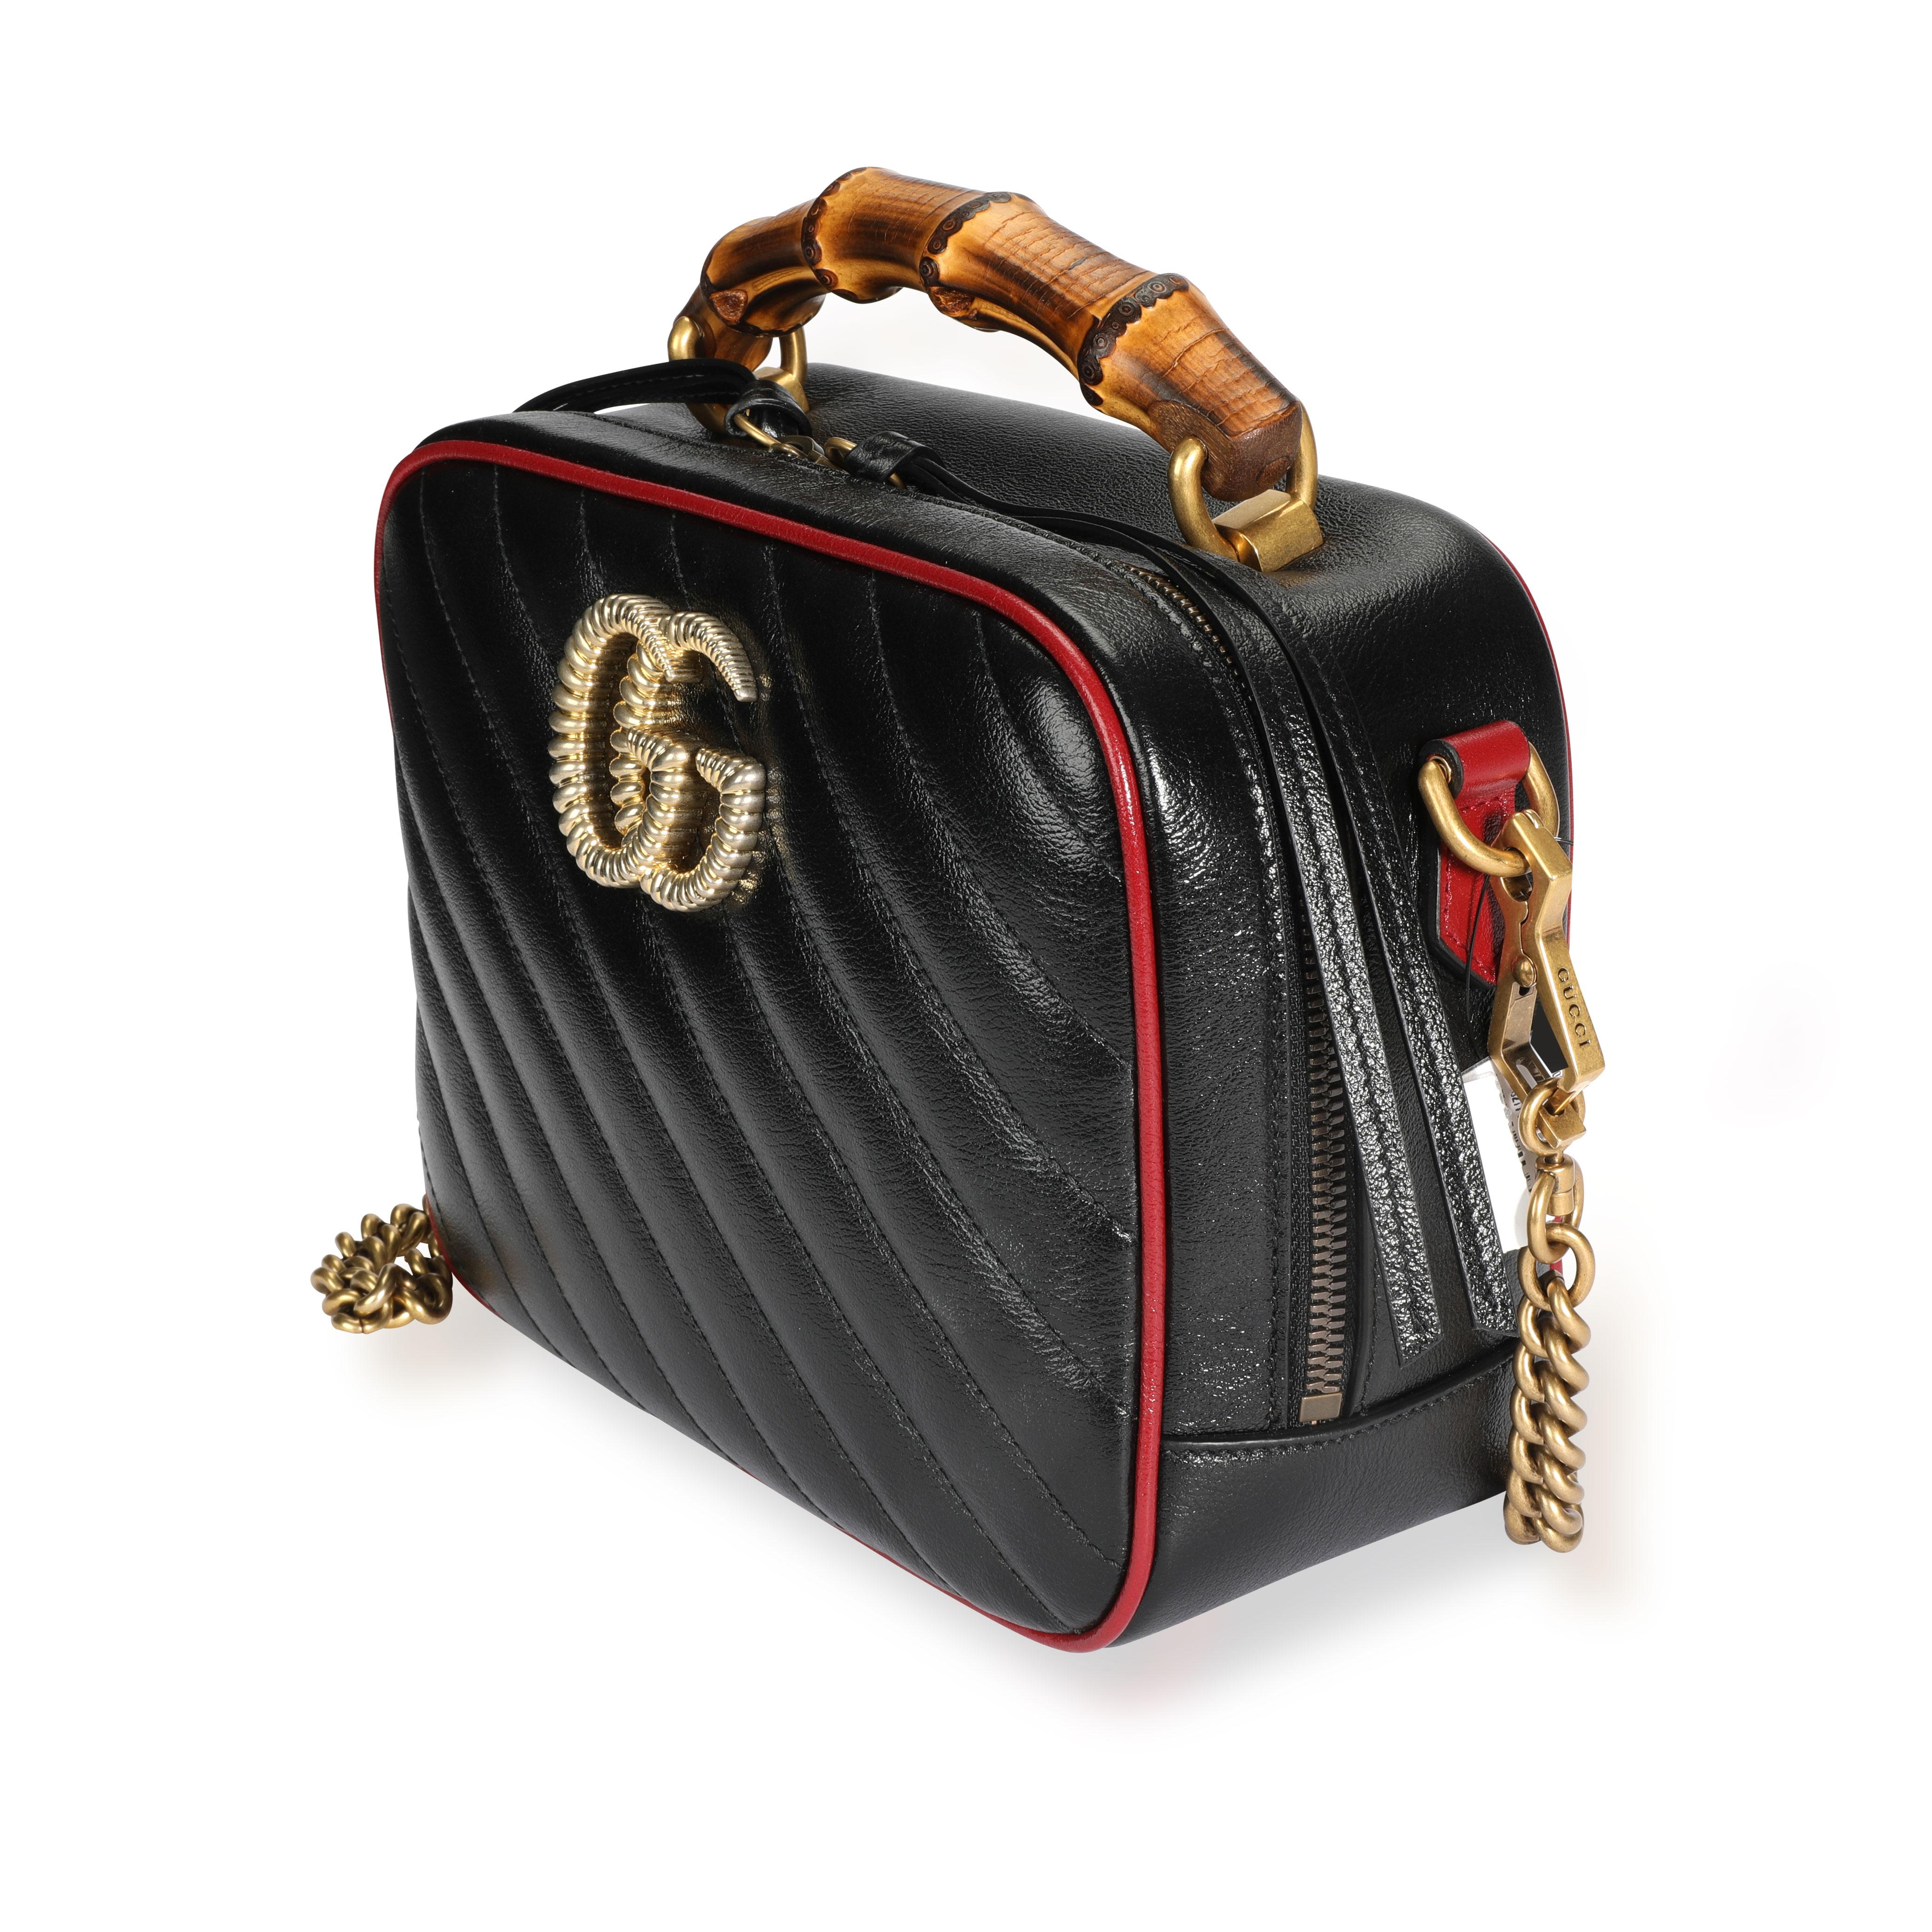 Gucci Black Matelassé Leather GG Marmont Bamboo Small Bag
SKU: 108515
MSRP: 2490.00
Condition: Pre-owned (3000)
Handbag Condition: Excellent
Condition Comments: Excellent Condition. No visible signs of wear. Please note: this item does not include